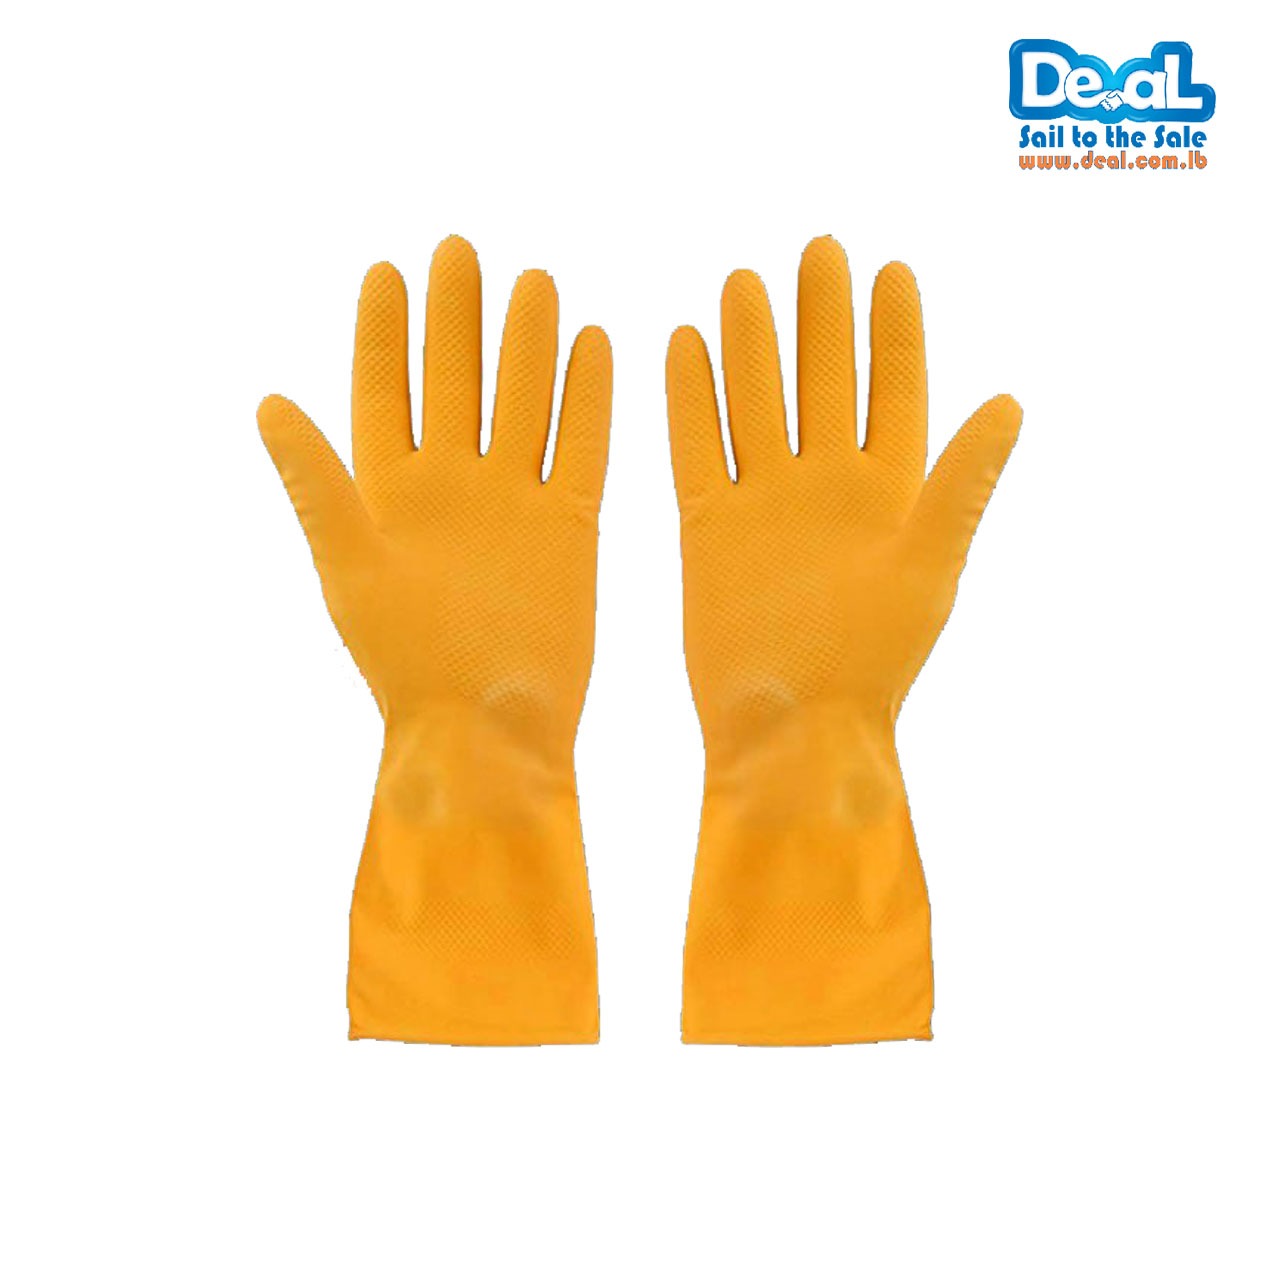 General Duty Latex Protective Gloves |Size| Small - Large